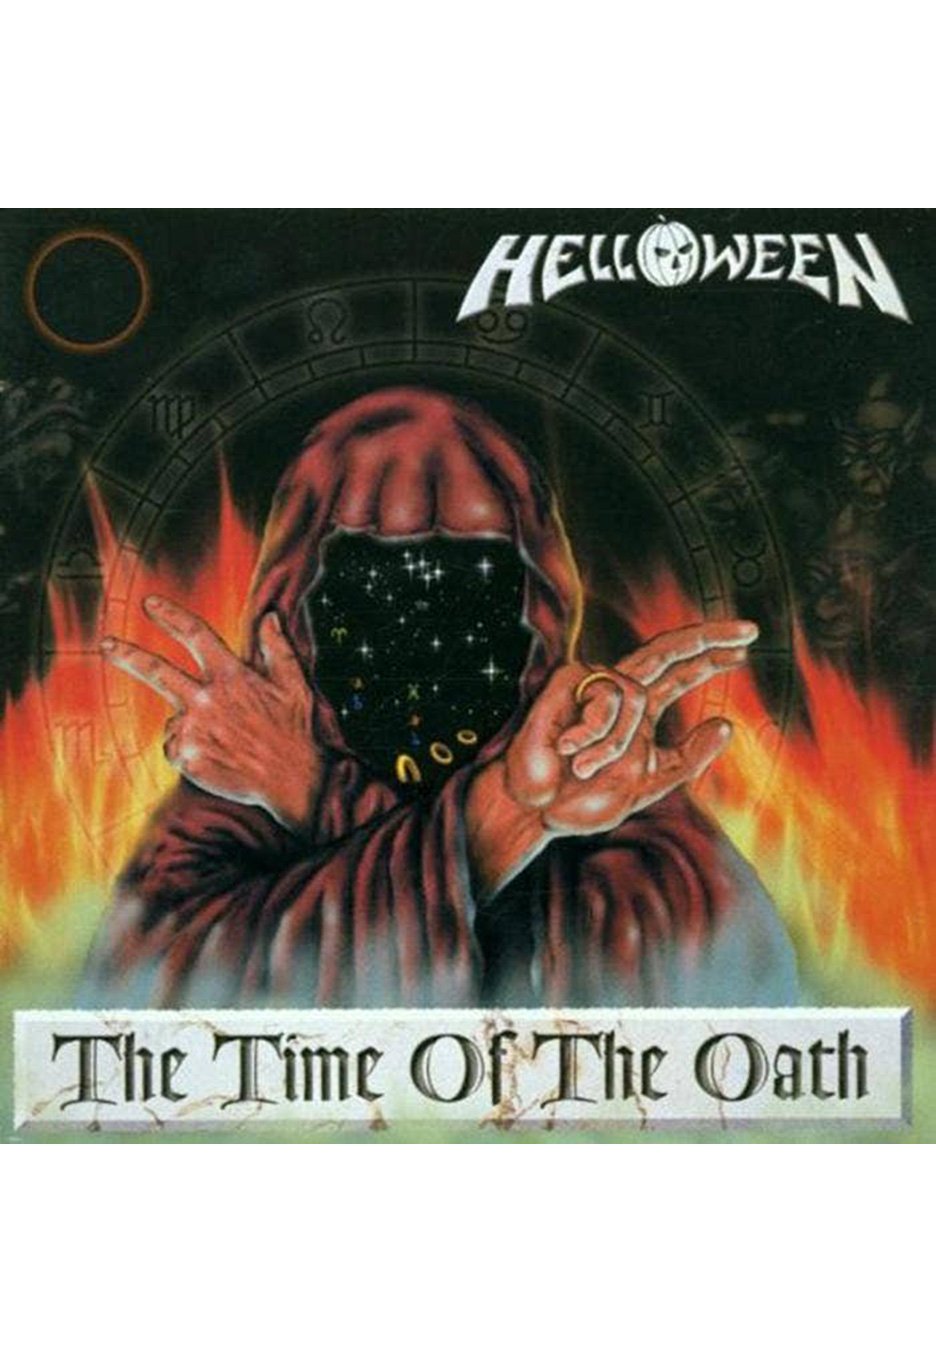 Helloween - The Time Of The Oath - Vinyl